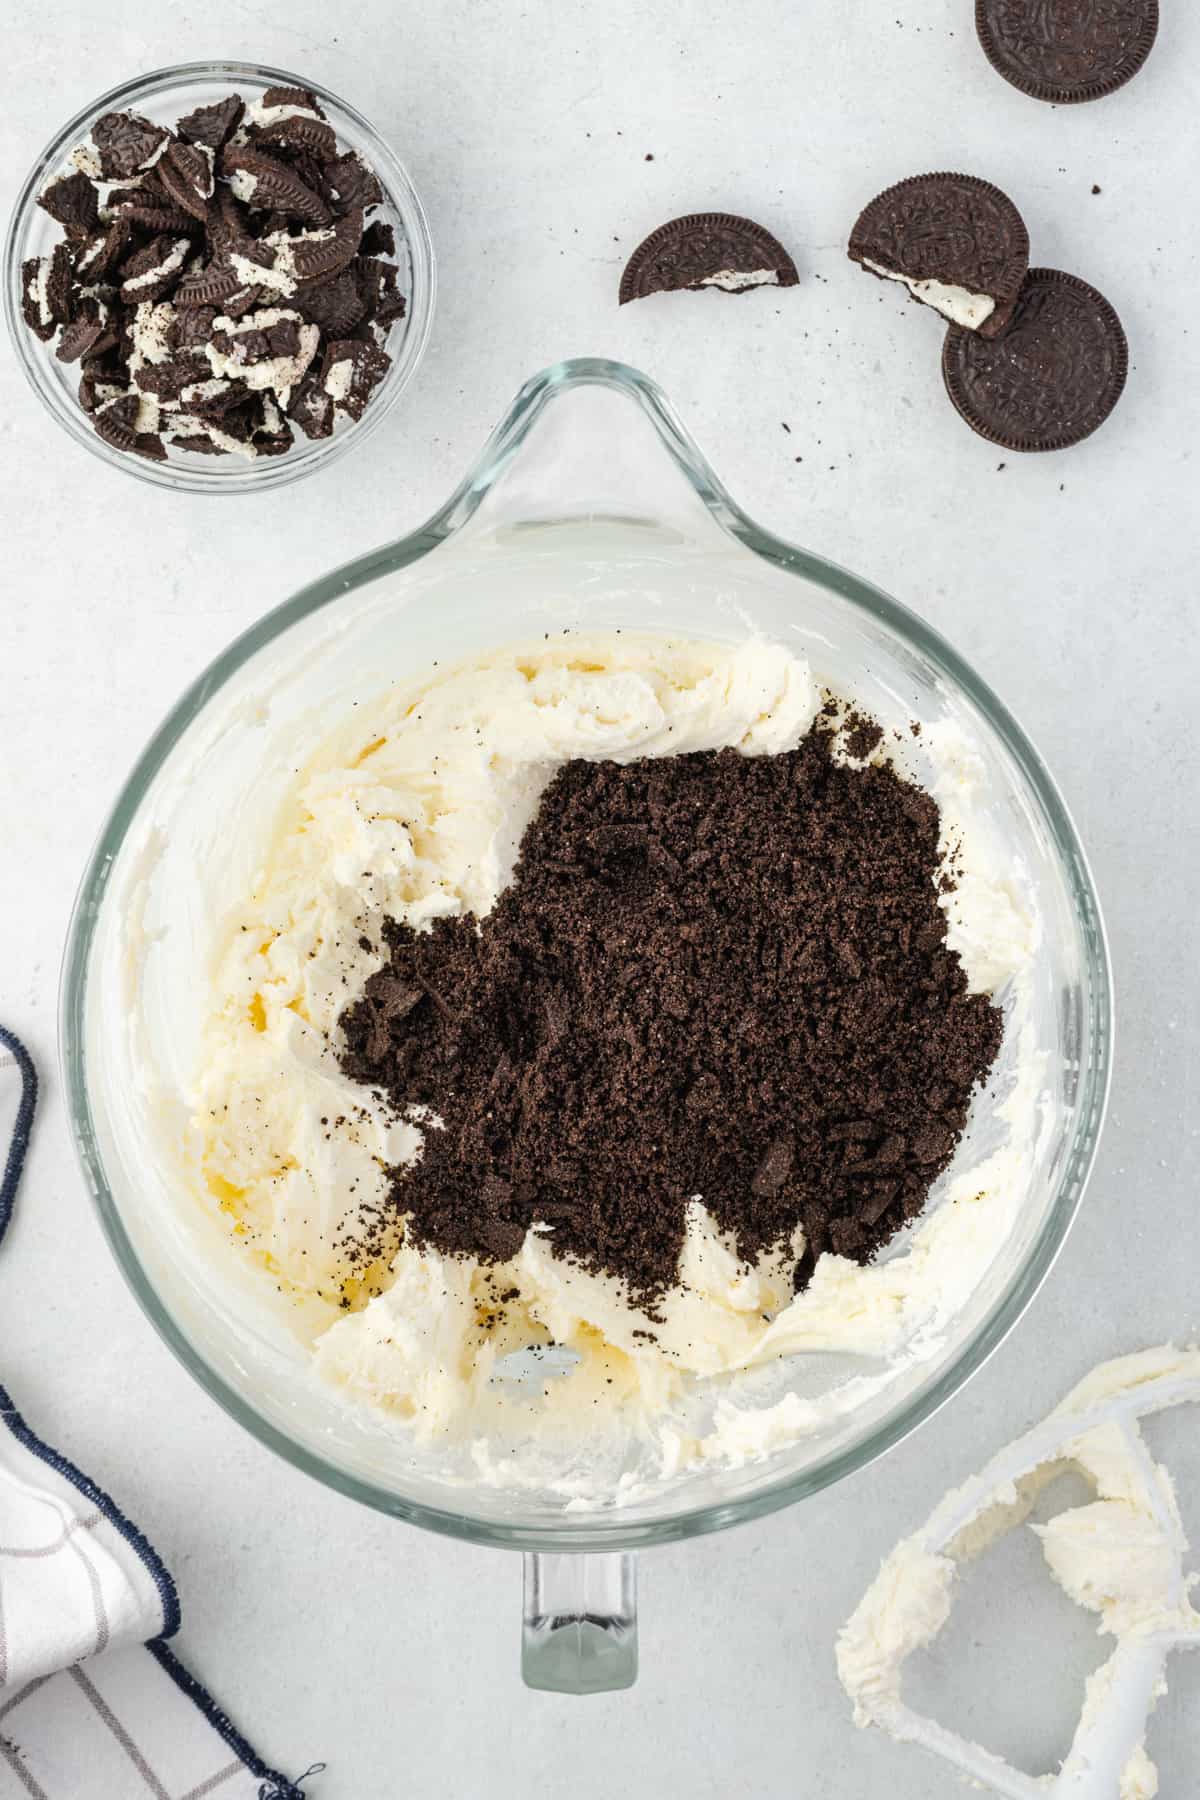 Crushed Oreo crumbs in a glass mixing bowl with vanilla buttercream